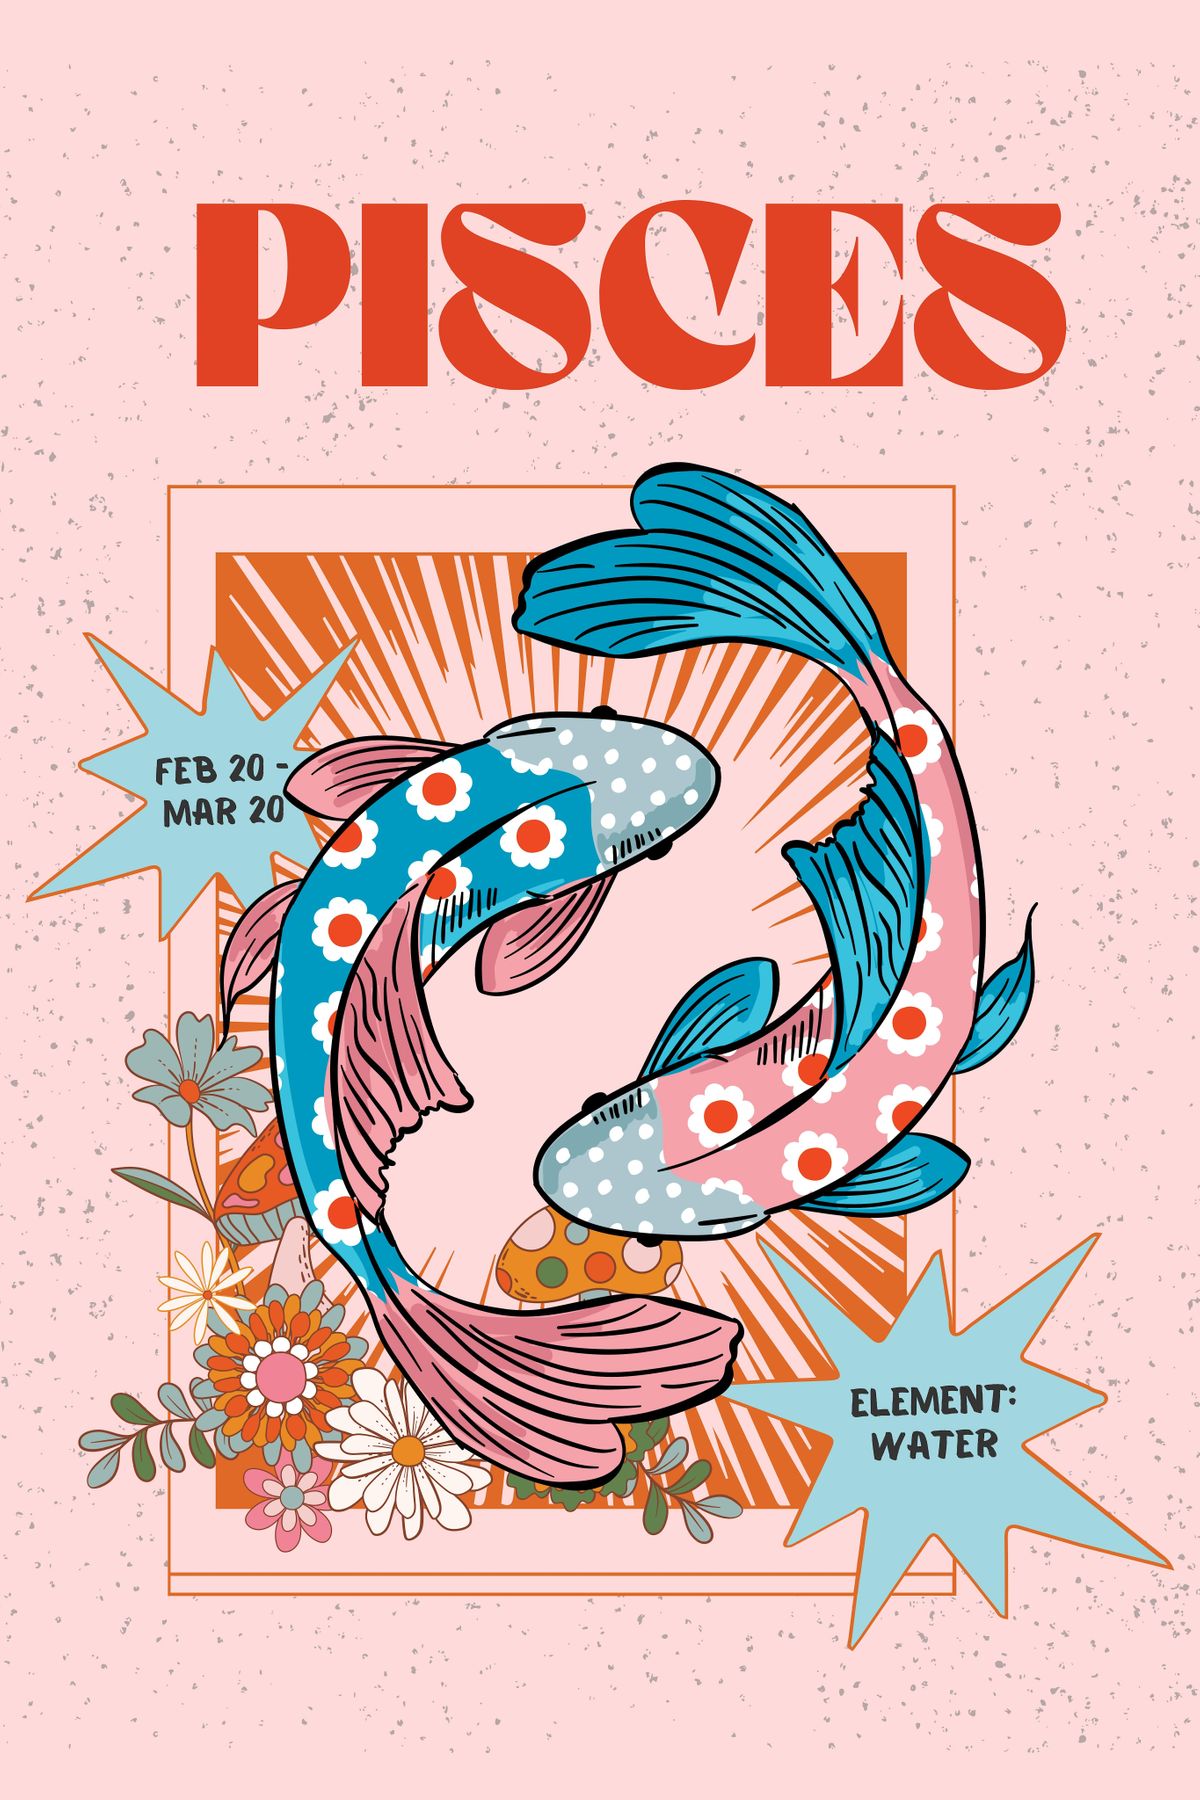 Monthly Astrology Dinner - Pisces